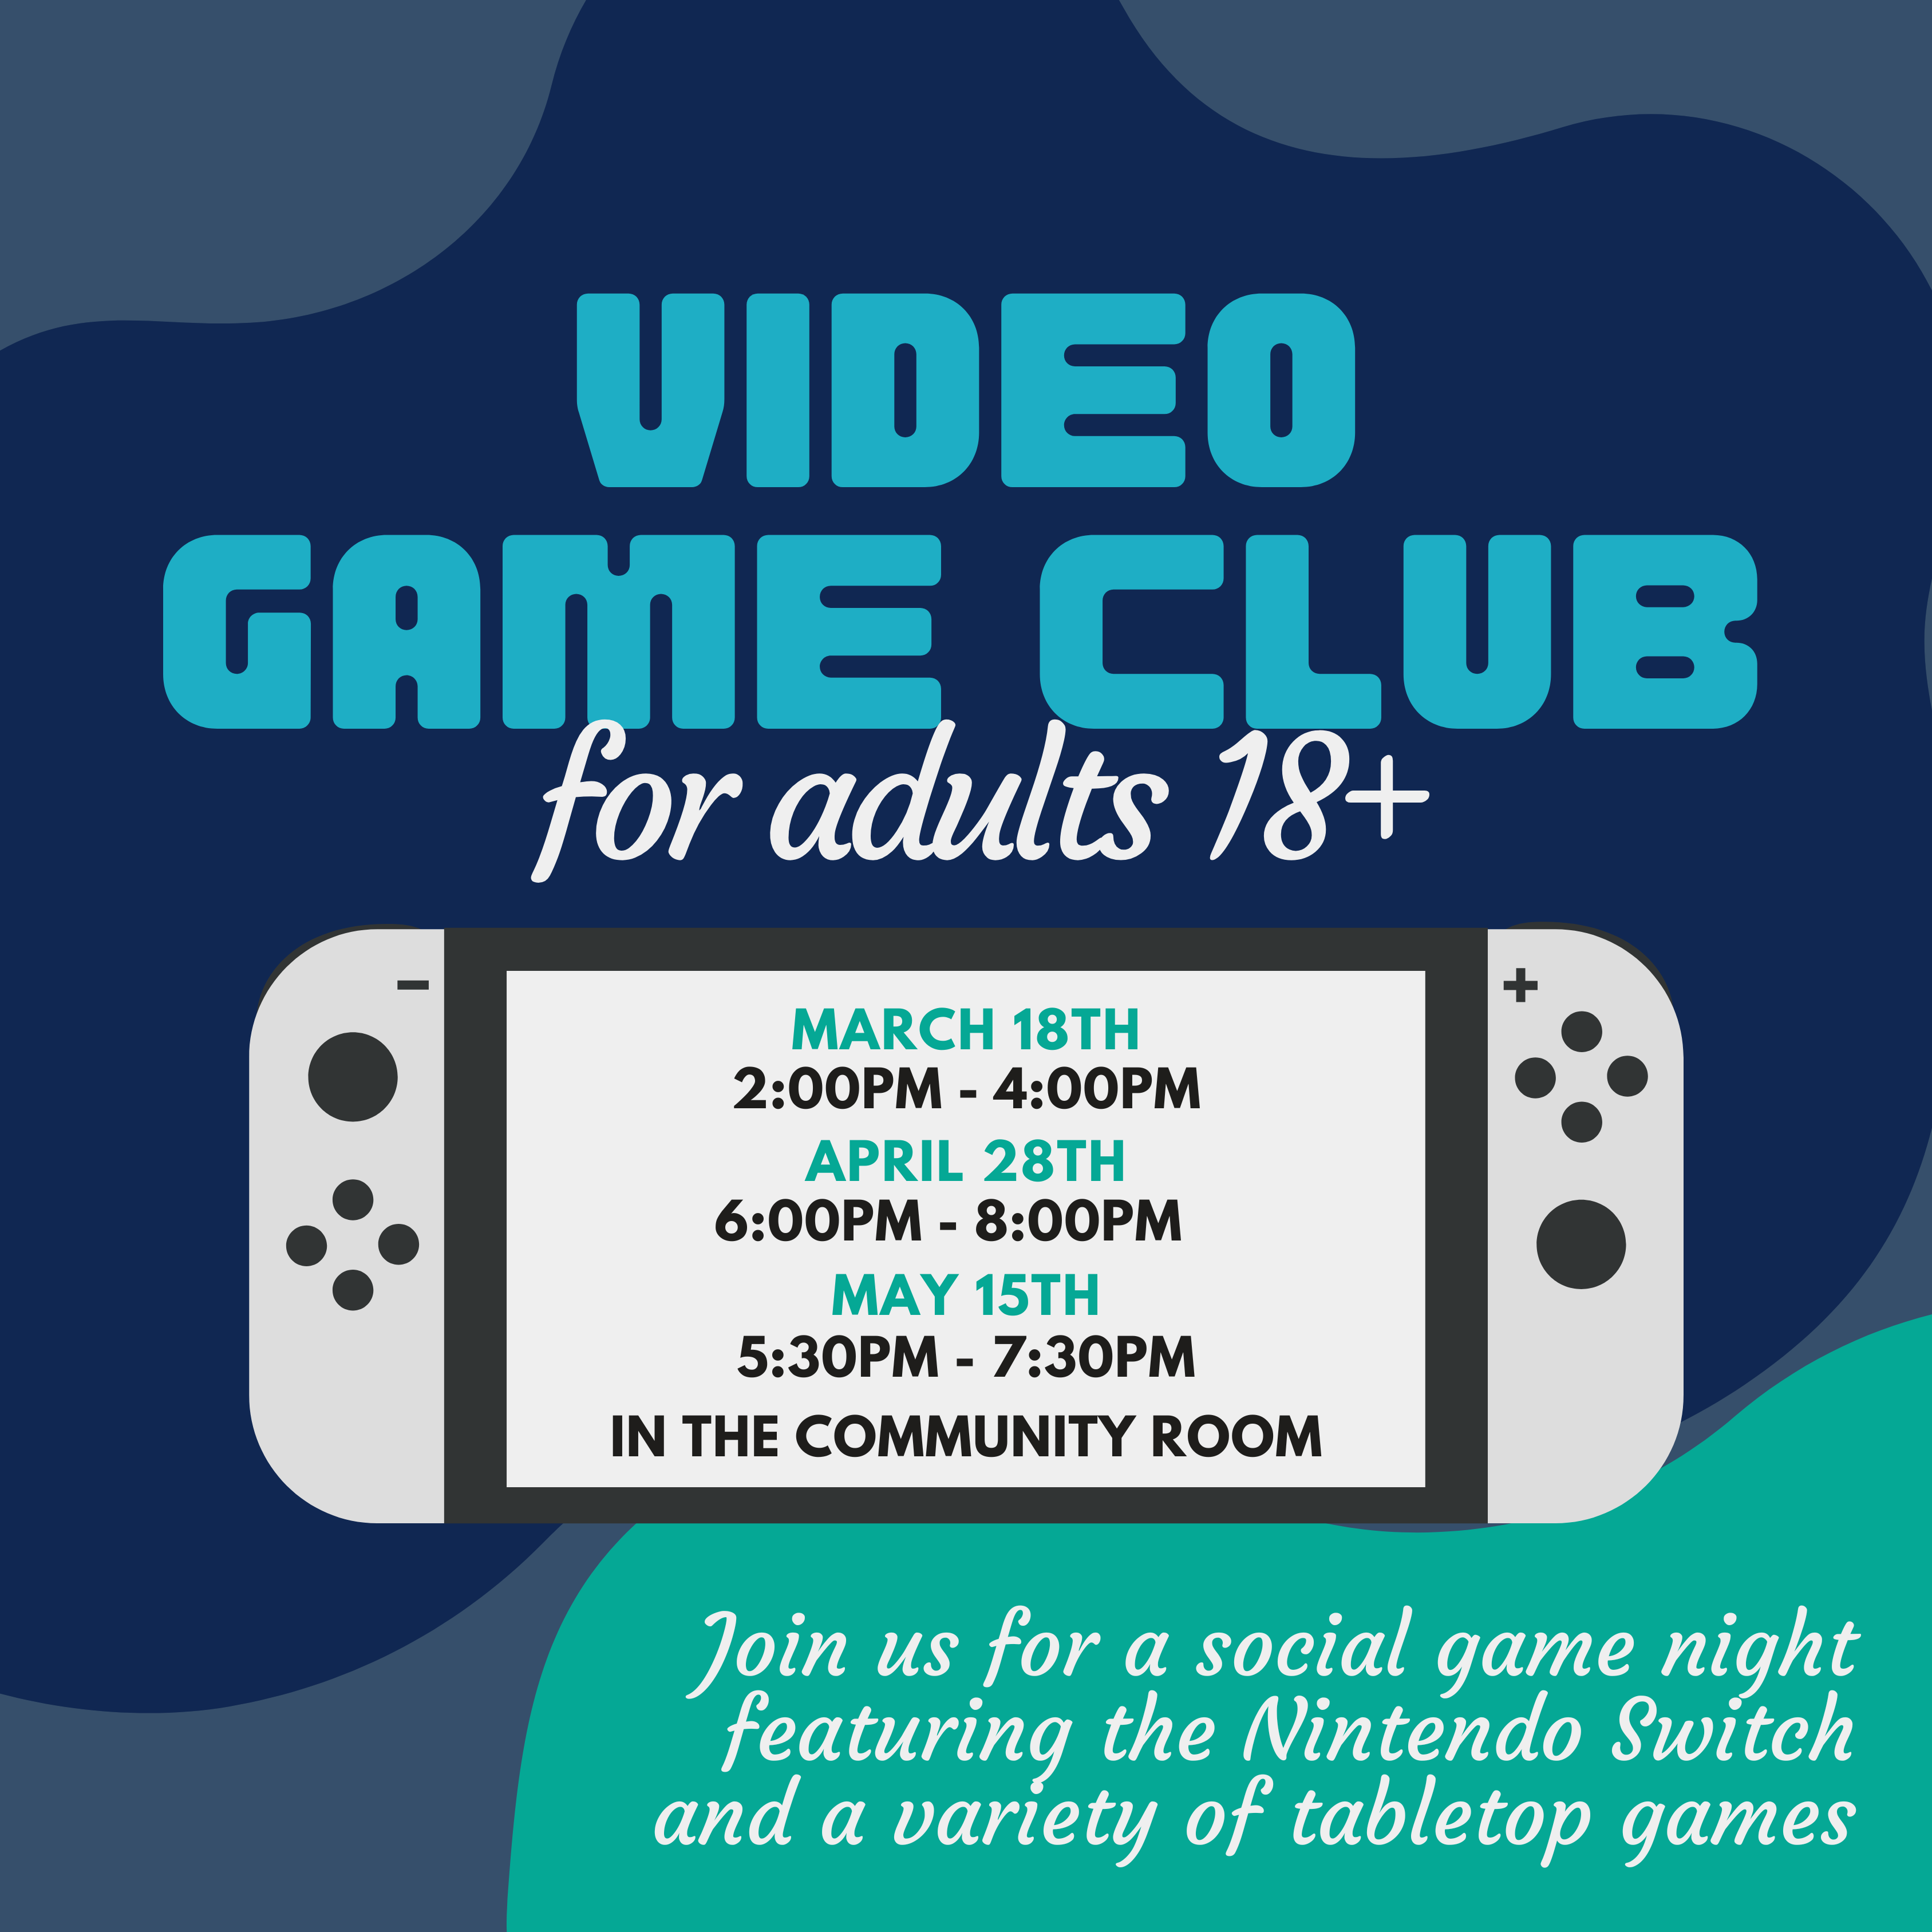 Video Game Club for adults 18+. March 18th from 2:00PM to 4:00PM, April 28th from 6:00PM to 8:00PM, May 15th from 5:30PM to 7:30PM In the community room. Join us for a social game night featuring the Nintendo Switch and a variety of tabletop games.